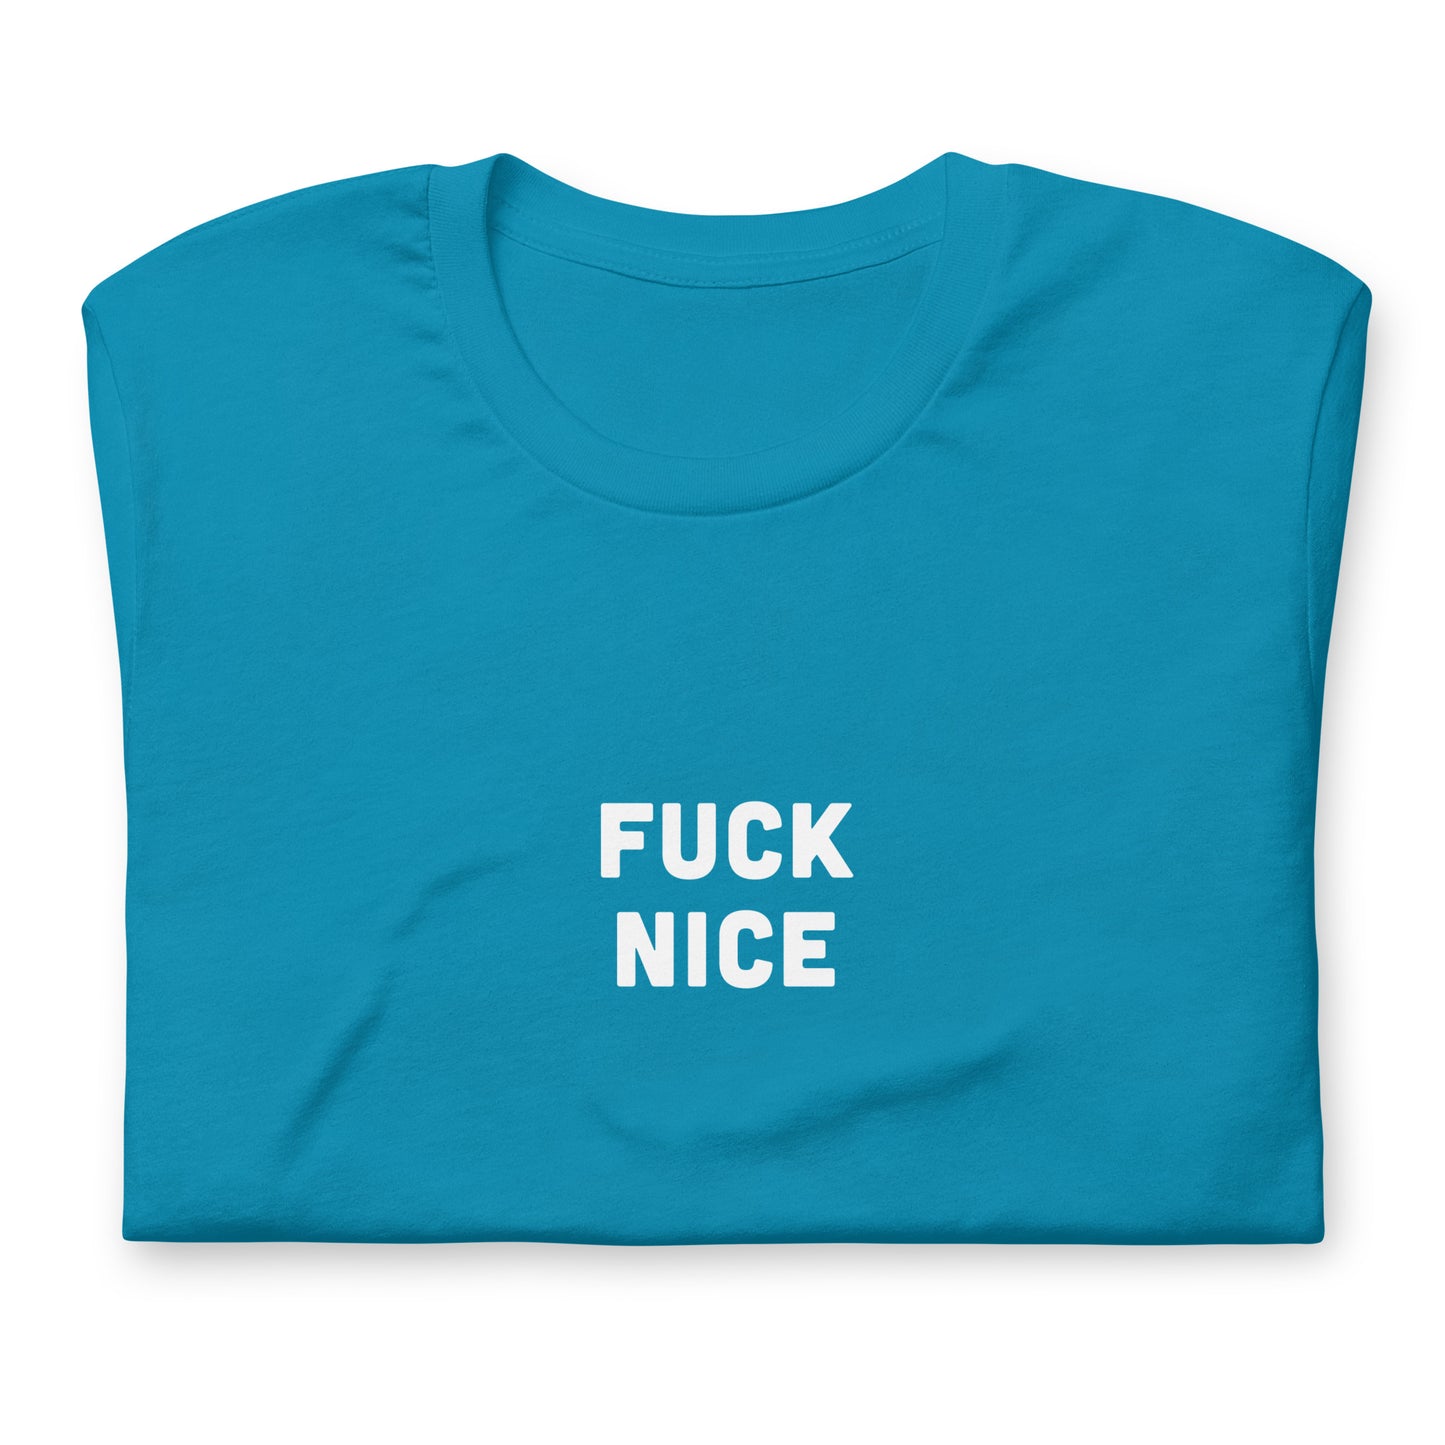 Fuck Nice T-Shirt Size M Color Navy